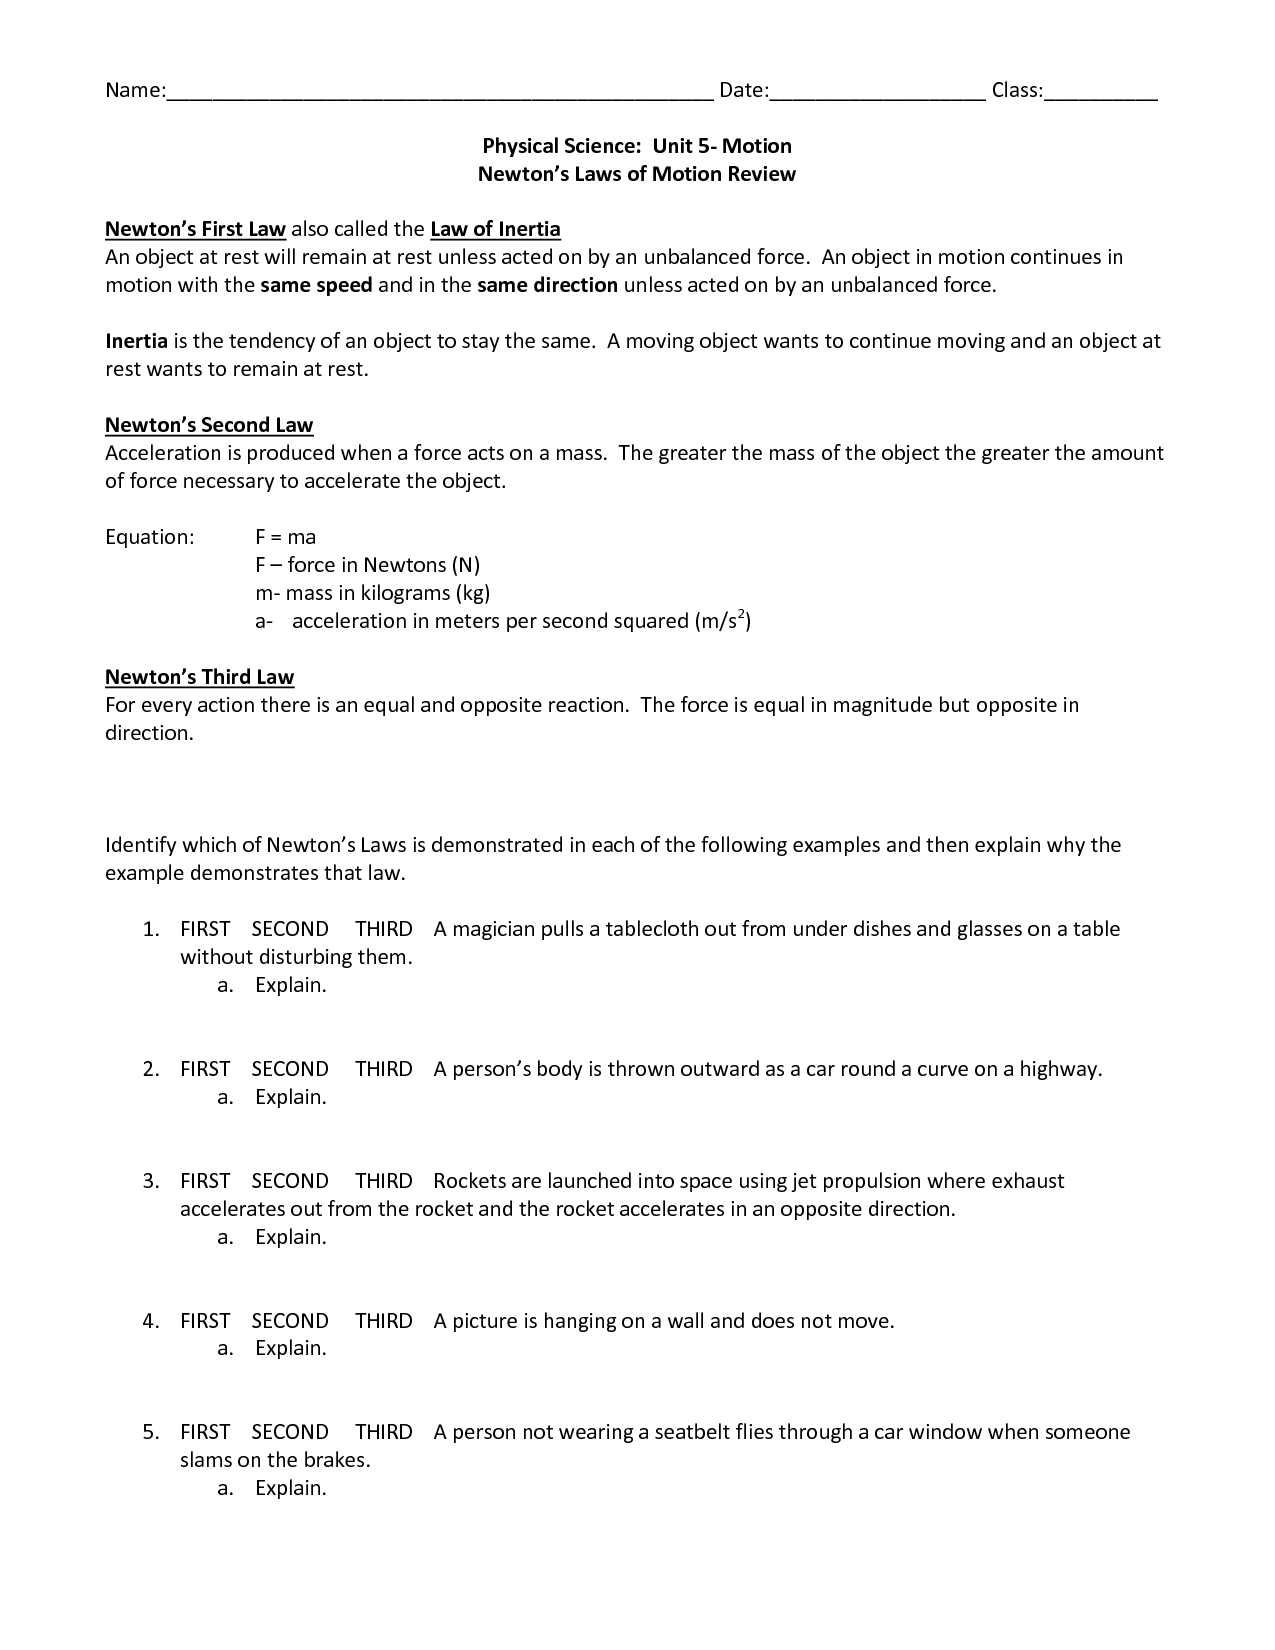 Newtons Laws Of Motion Worksheet Answers - Nidecmege Throughout Newton039s Laws Of Motion Worksheet